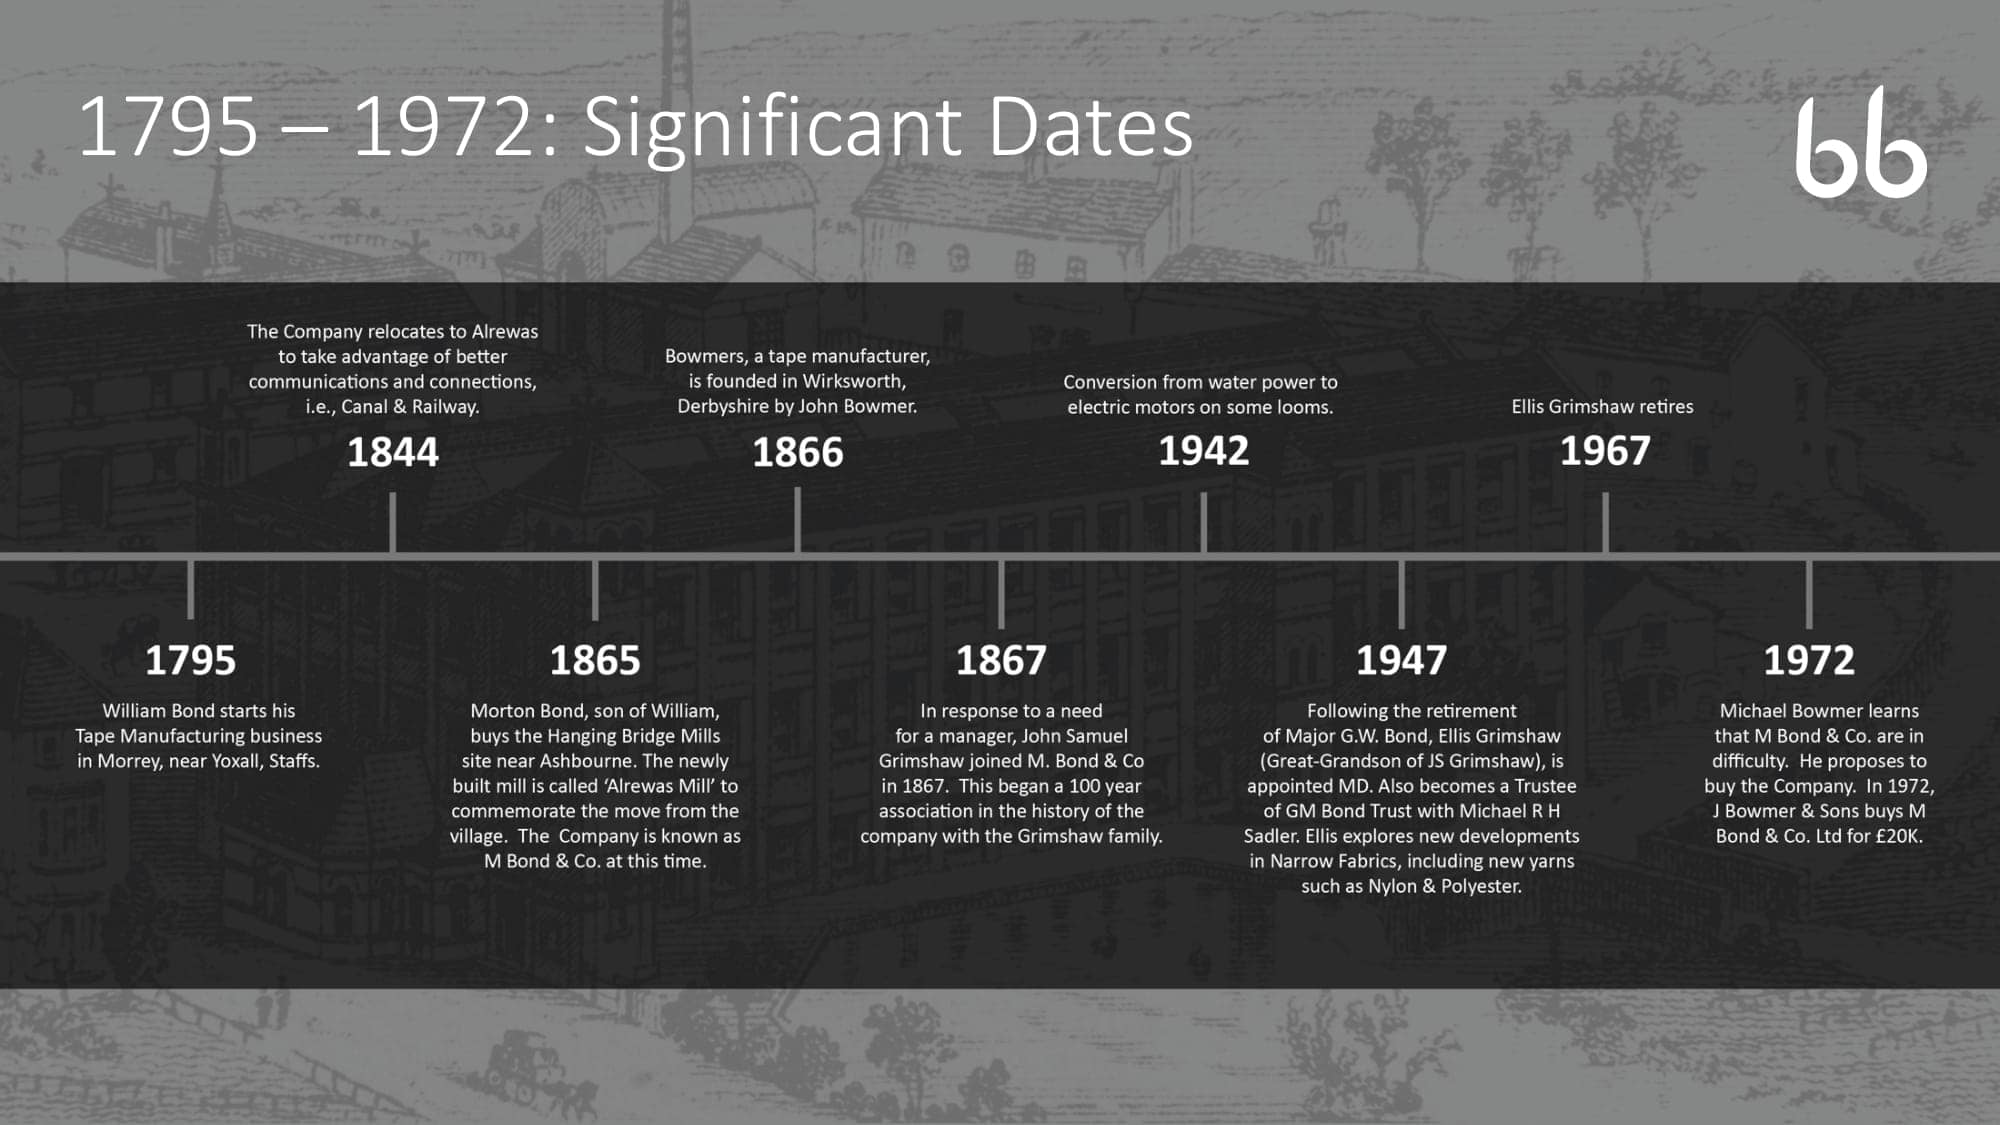 1795 - 1972 Significant Dates